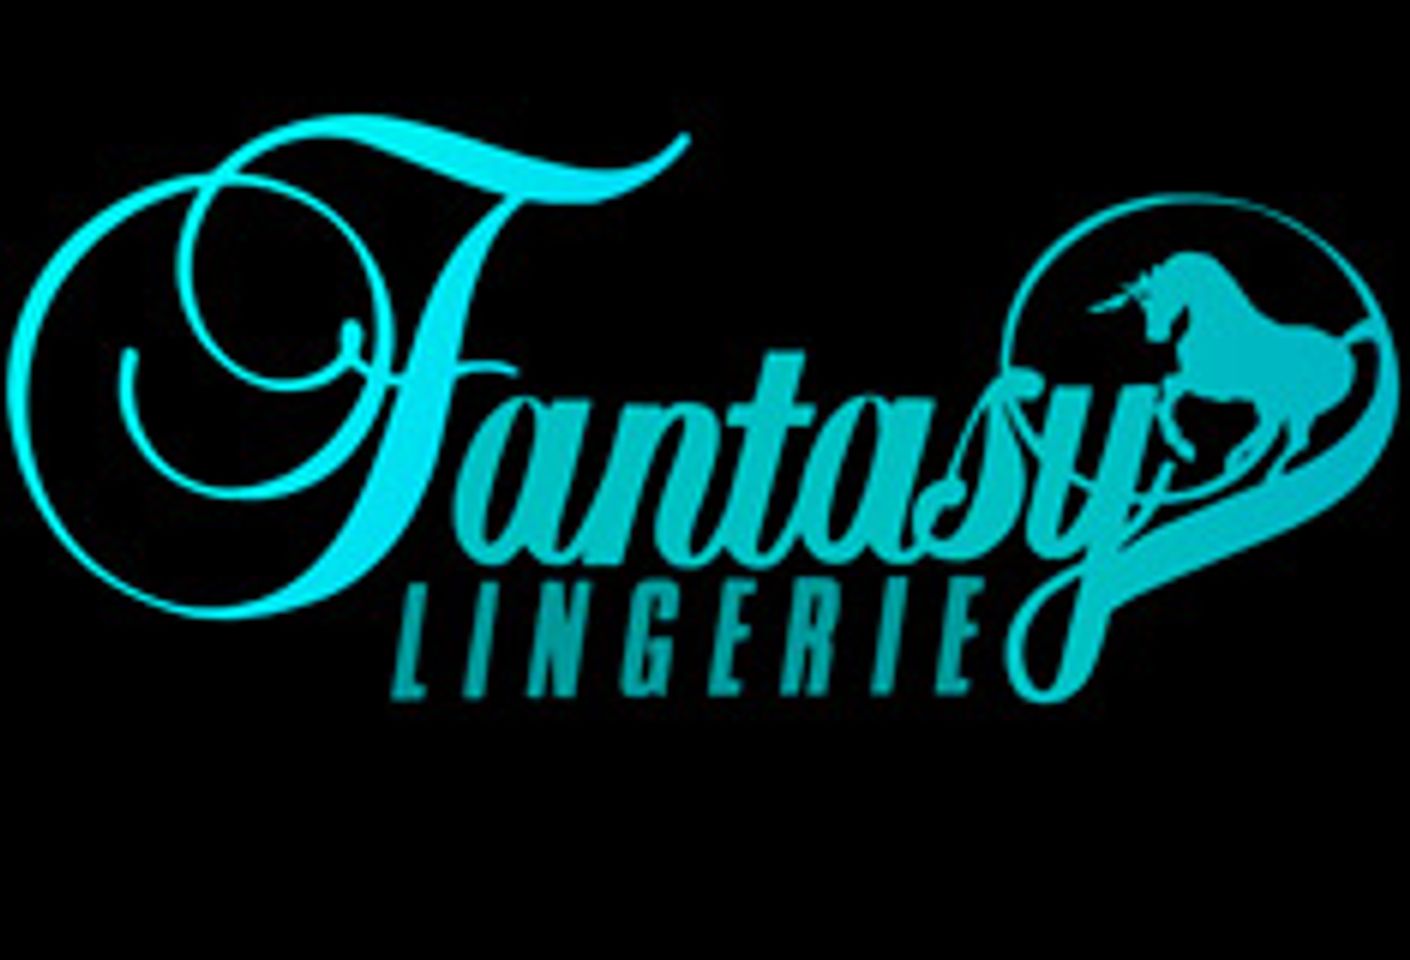 Fantasy Lingerie's Excite Line Wins Outstanding Lingerie Collection at 'O' Awards